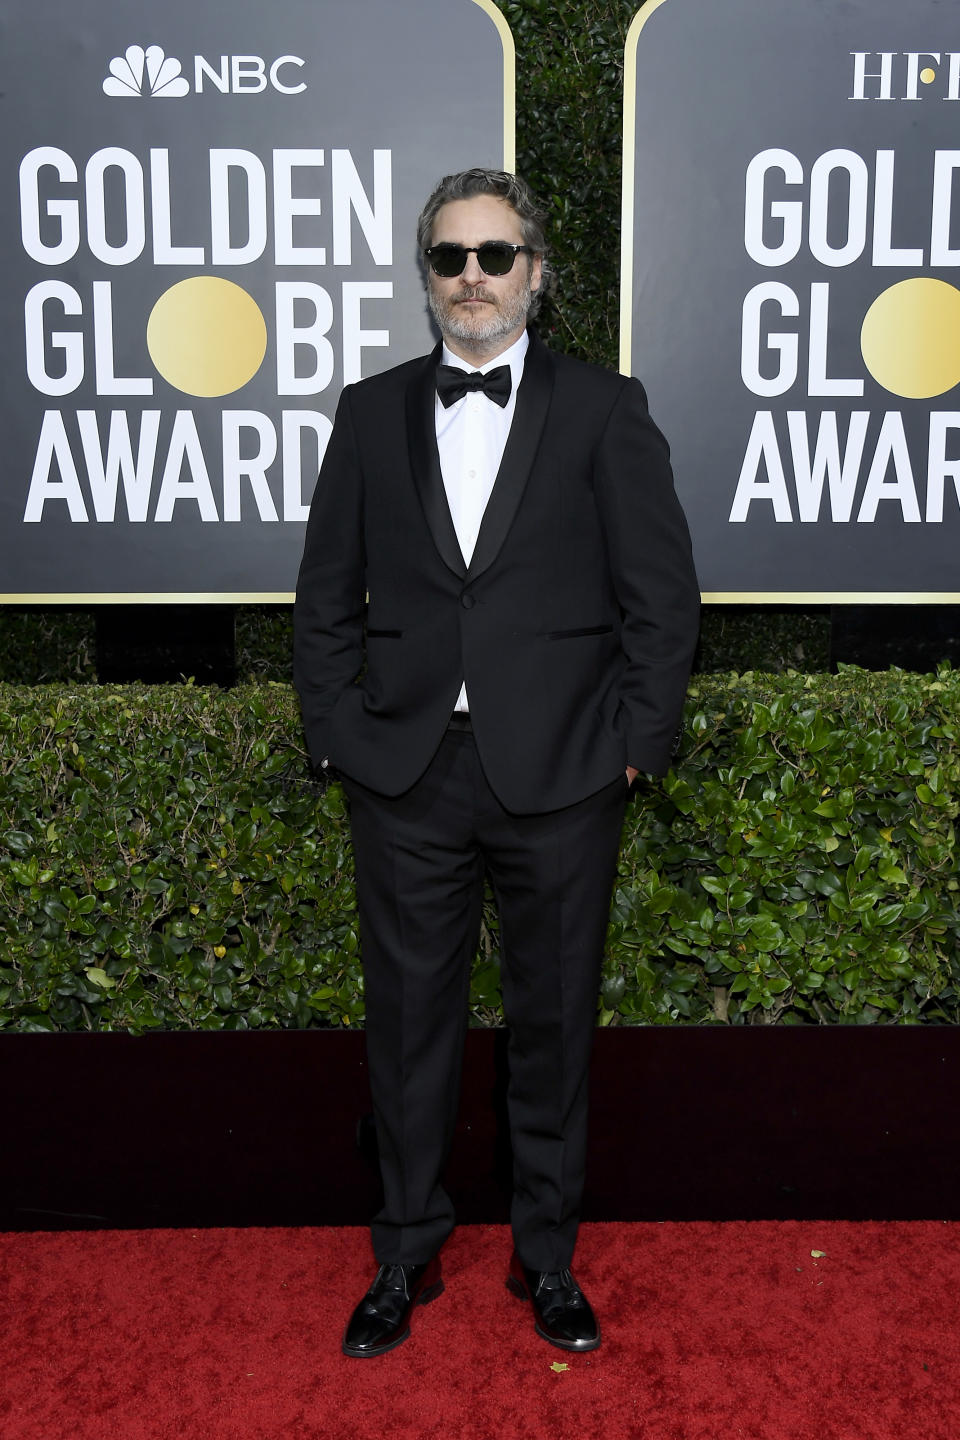 BEVERLY HILLS, CALIFORNIA - JANUARY 05: 77th ANNUAL GOLDEN GLOBE AWARDS -- Pictured: Joaquin Phoenix arrives to the 77th Annual Golden Globe Awards held at the Beverly Hilton Hotel on January 5, 2020. -- (Photo by: Kevork Djansezian/NBC/NBCU Photo Bank via Getty Images)